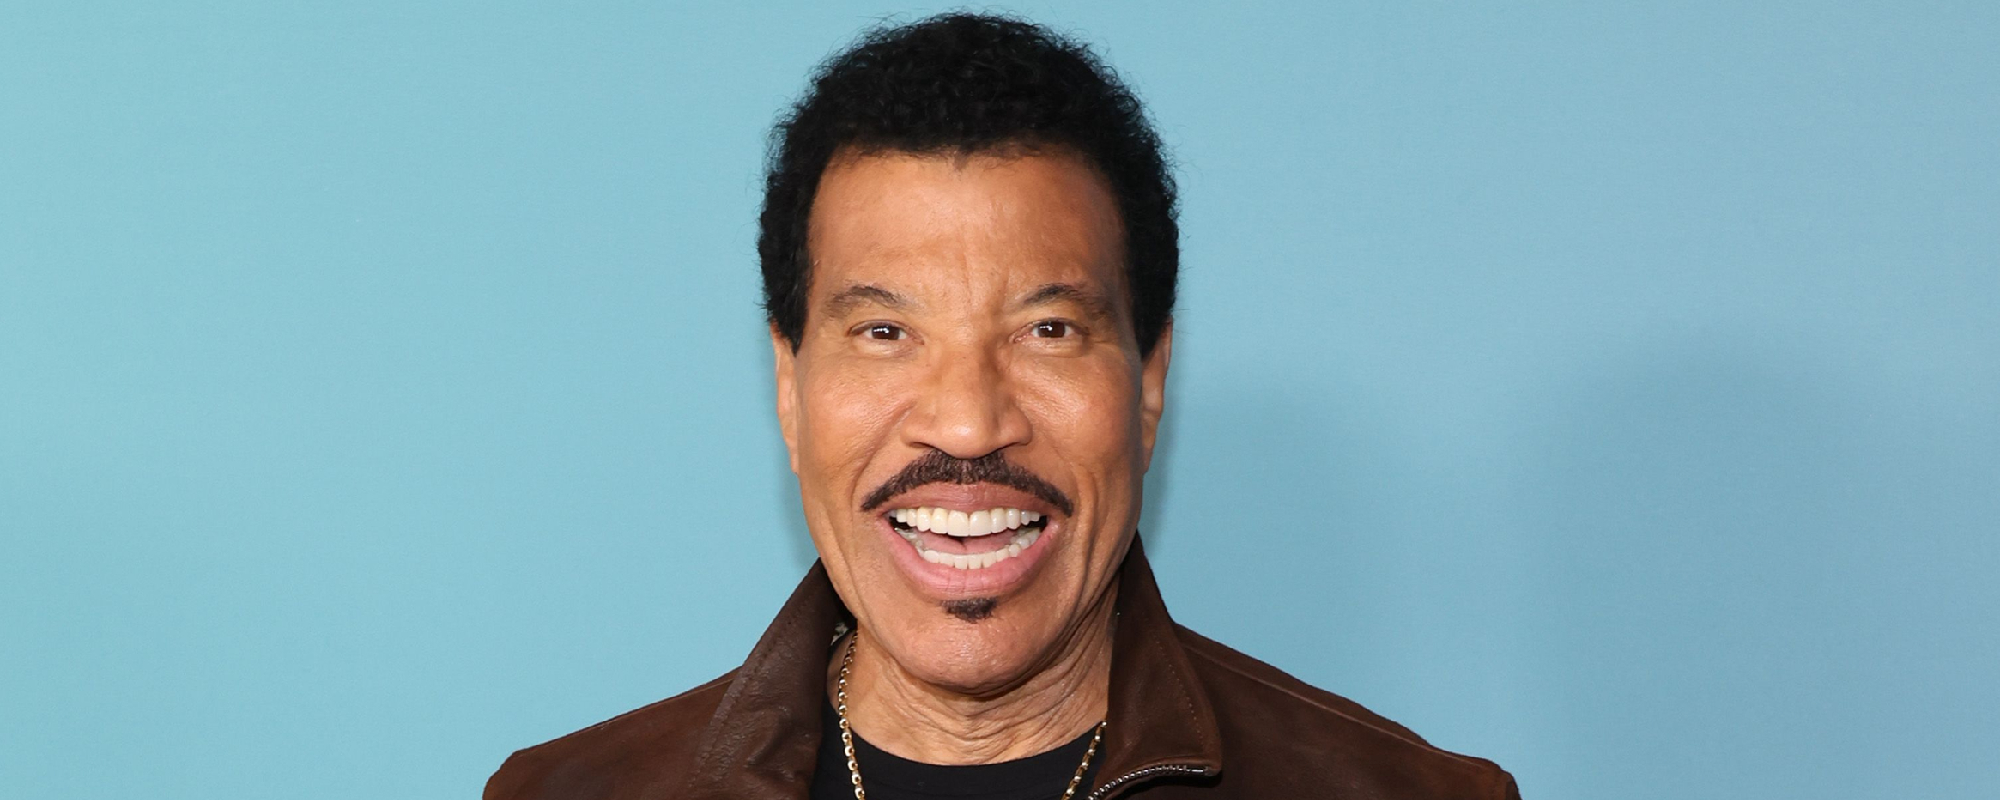 Lionel Richie Eyeing Former ‘The Voice’ Coach & Taylor Swift To Replace Katy Perry on ‘American Idol’